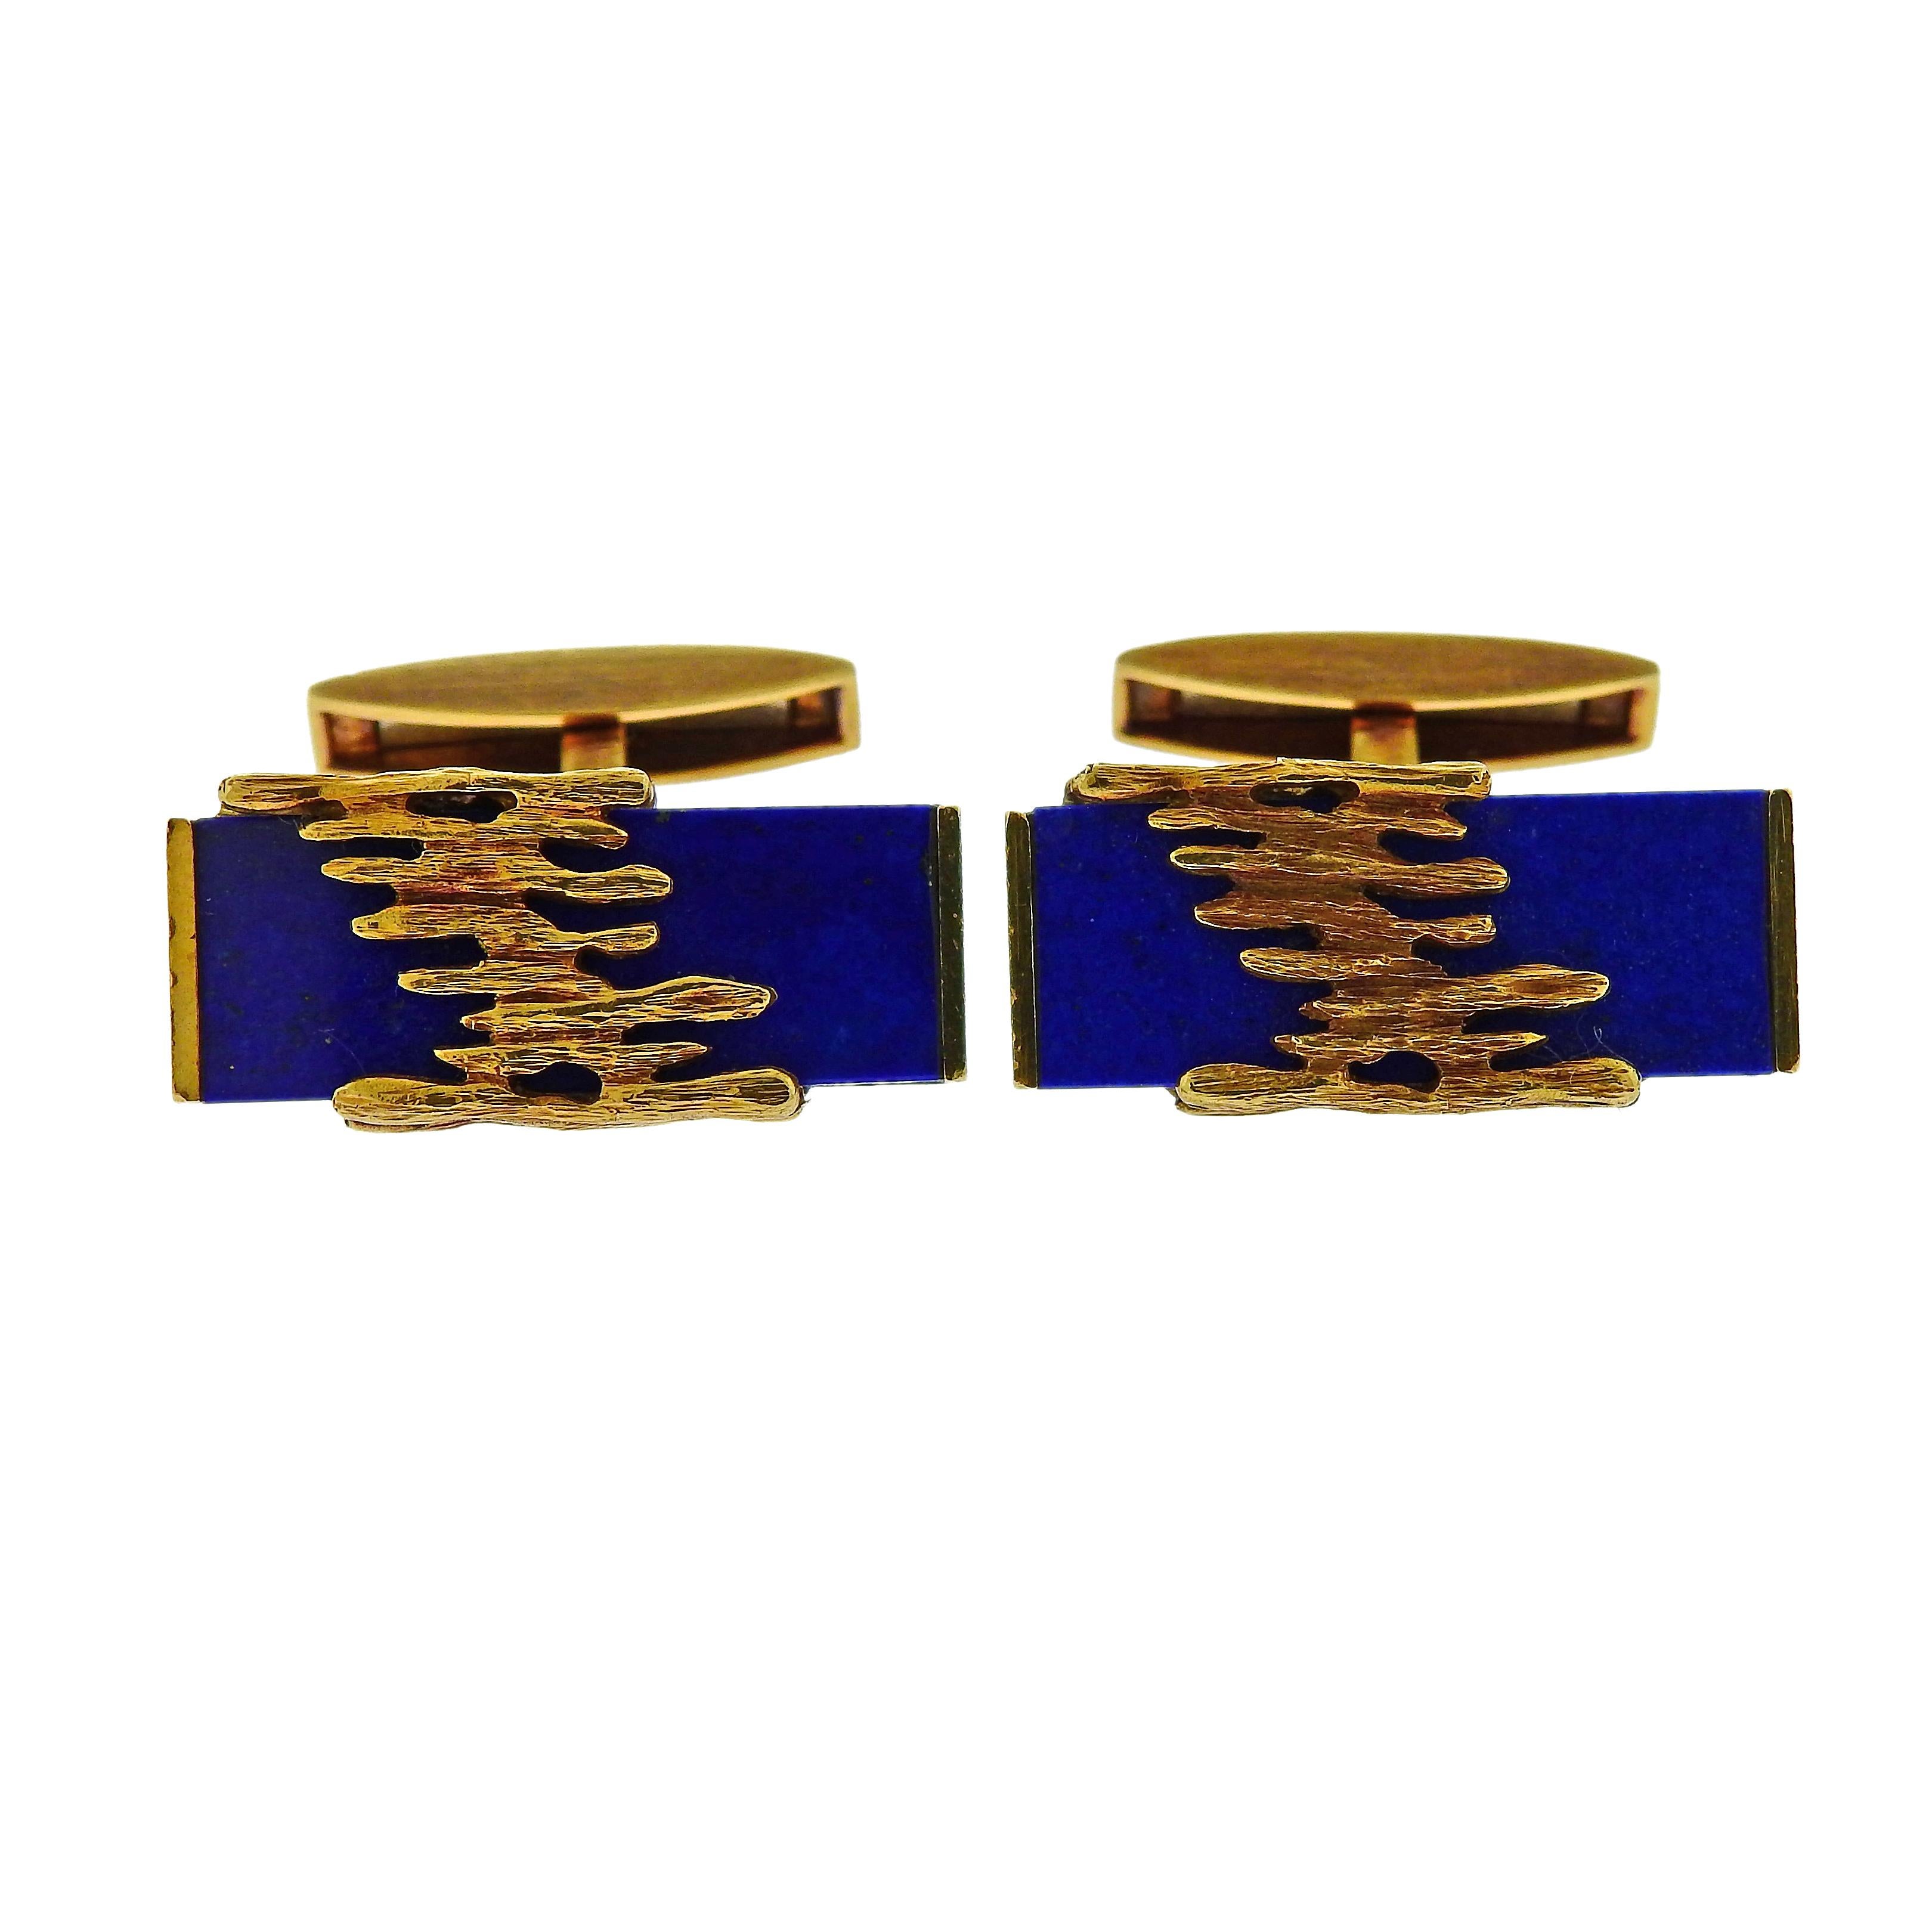 Pair of 18k yellow gold circa 1970s cufflinks, designed by Patek Philippe, set with lapis lazuli. Cufflink top - 26mm x 12mm. Weight is 23.9 grams. Marked 9001, 160, Patek Philippe, 750, Geneve.
